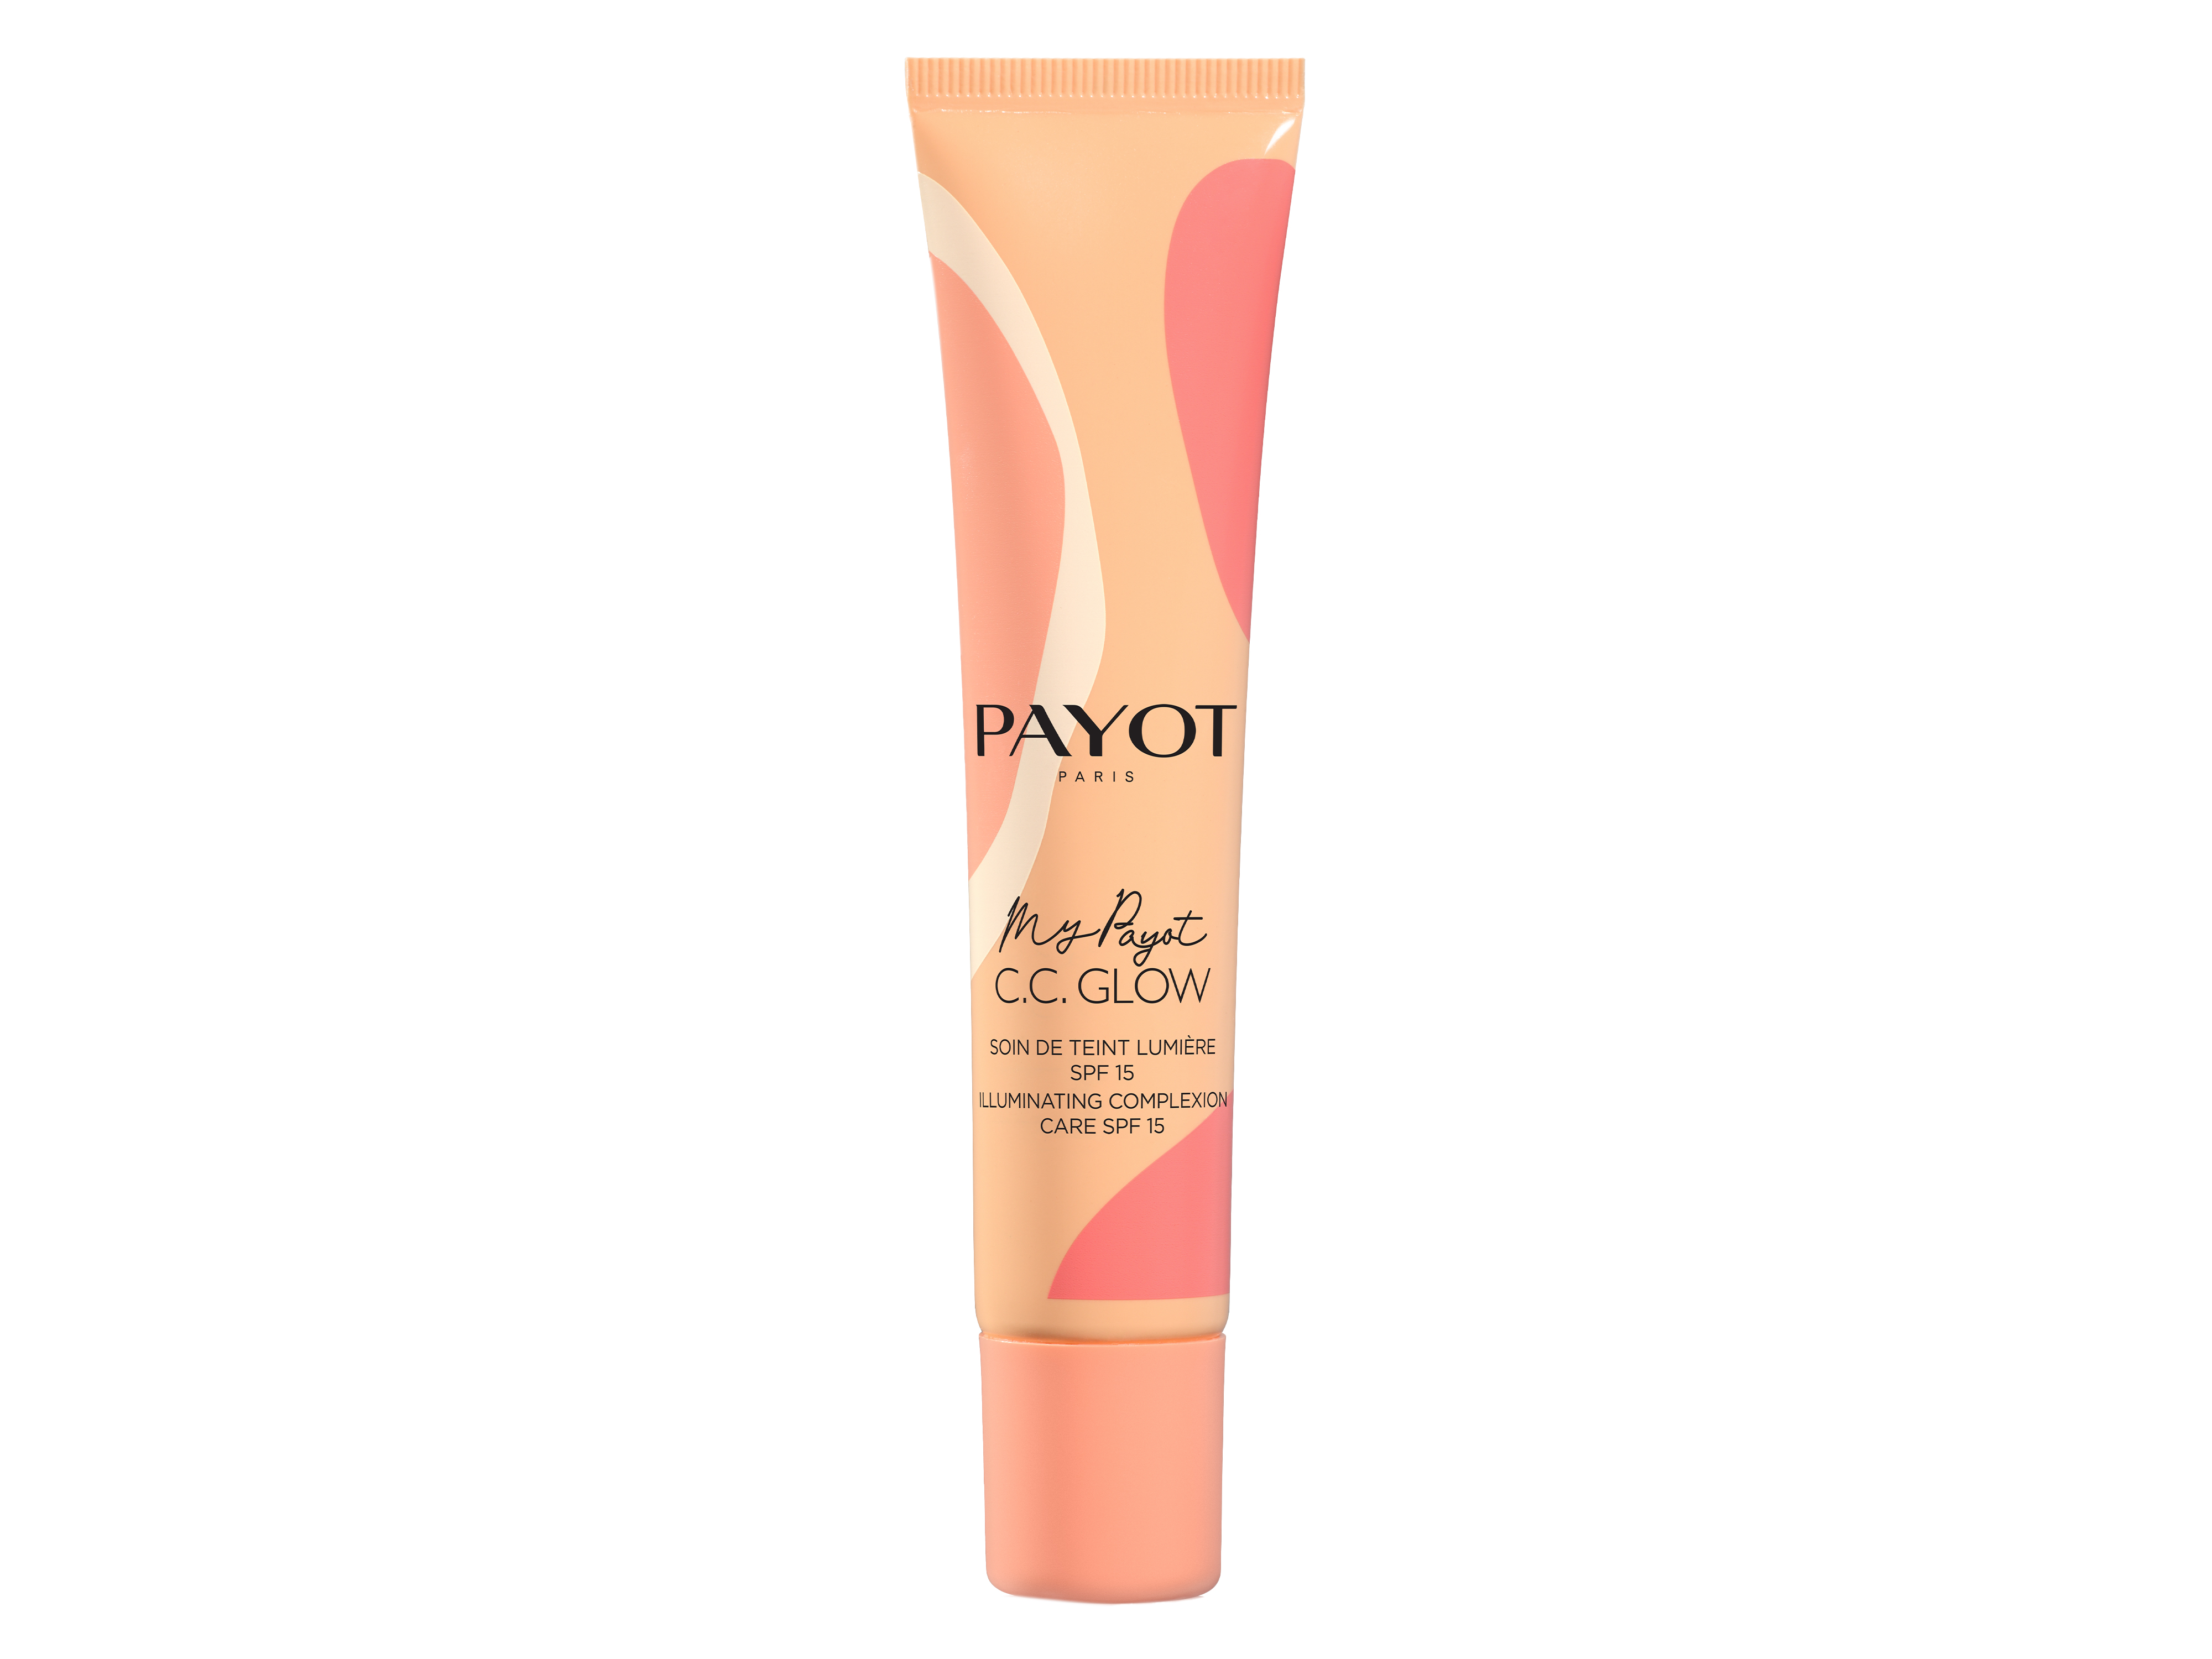 Payot My Payot C.C. Glow SPF15, 40 ml